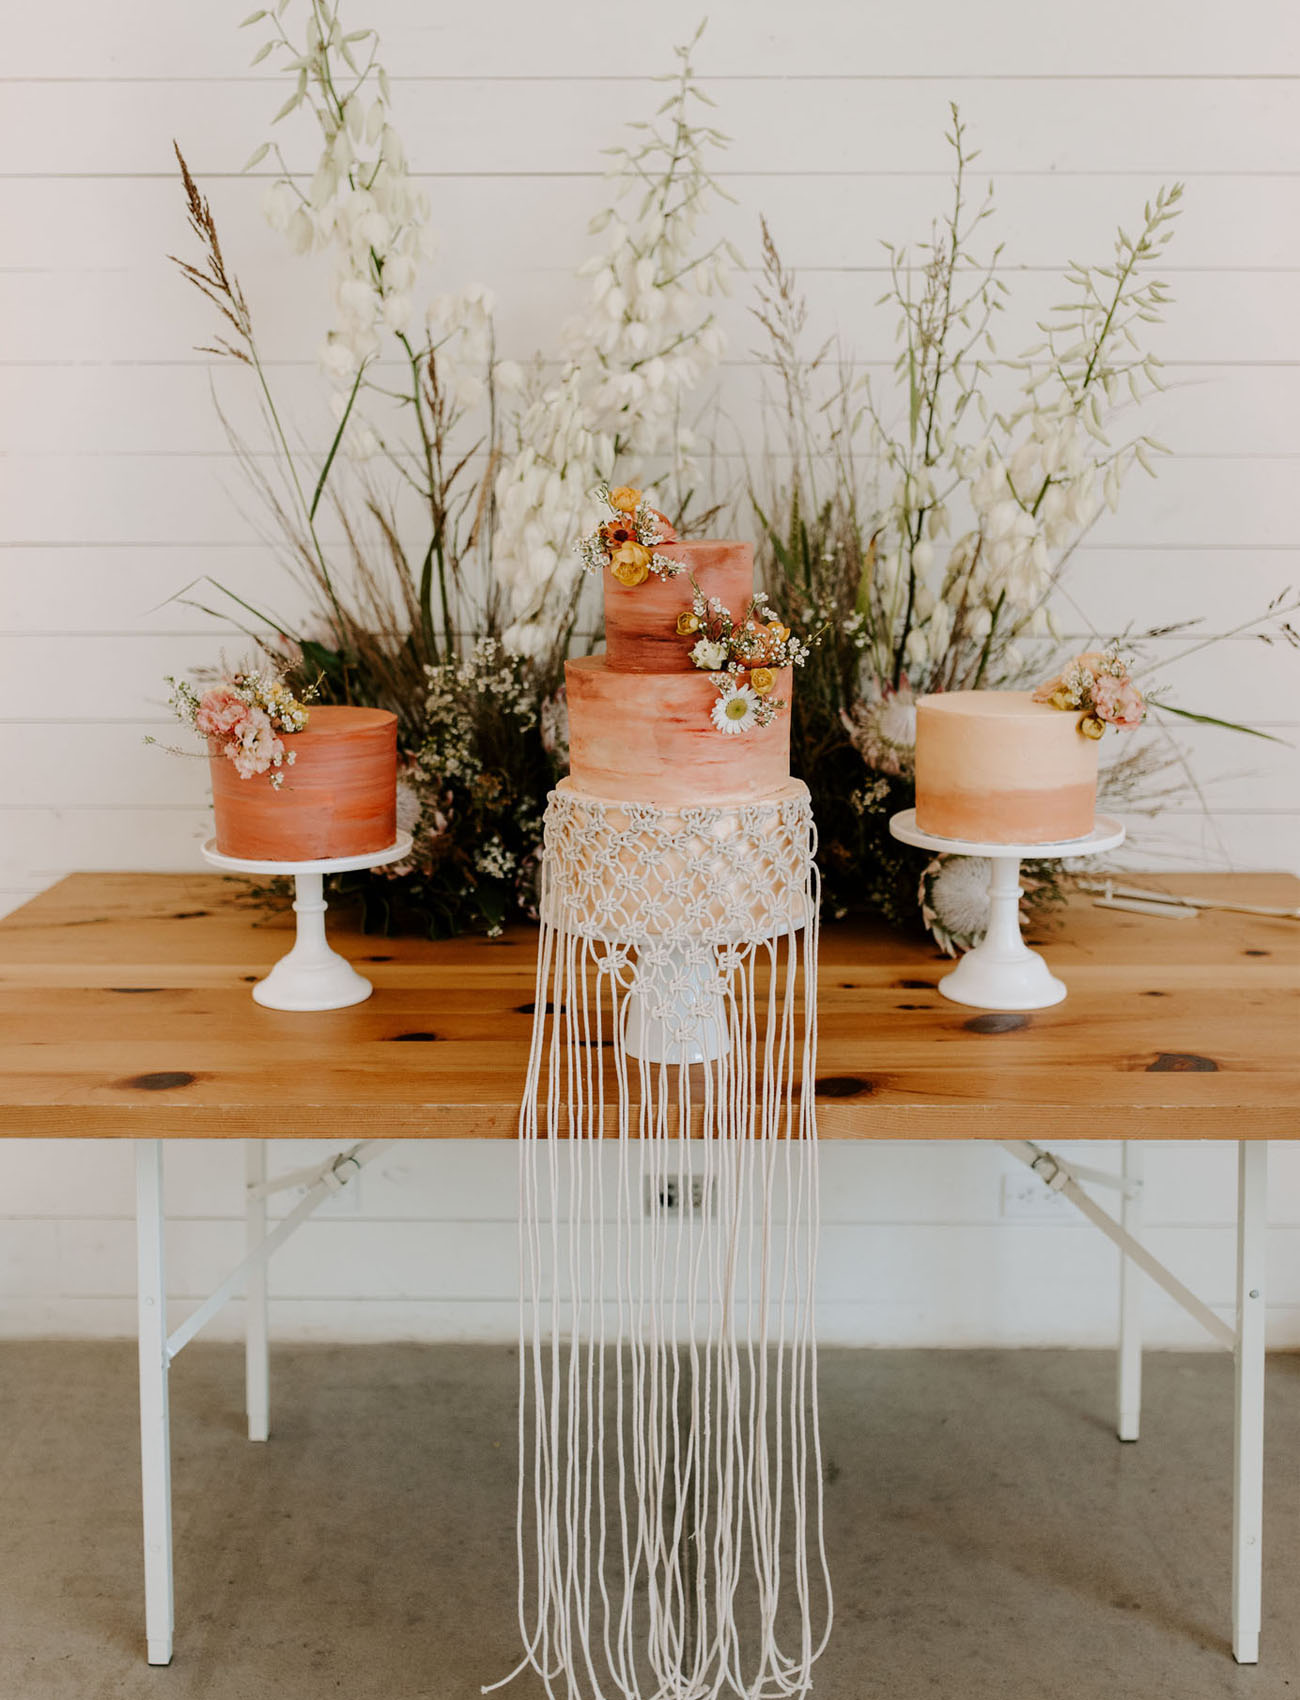 The wedding cakes were done in rust, with an ombre effect, blooms and macrame for decor